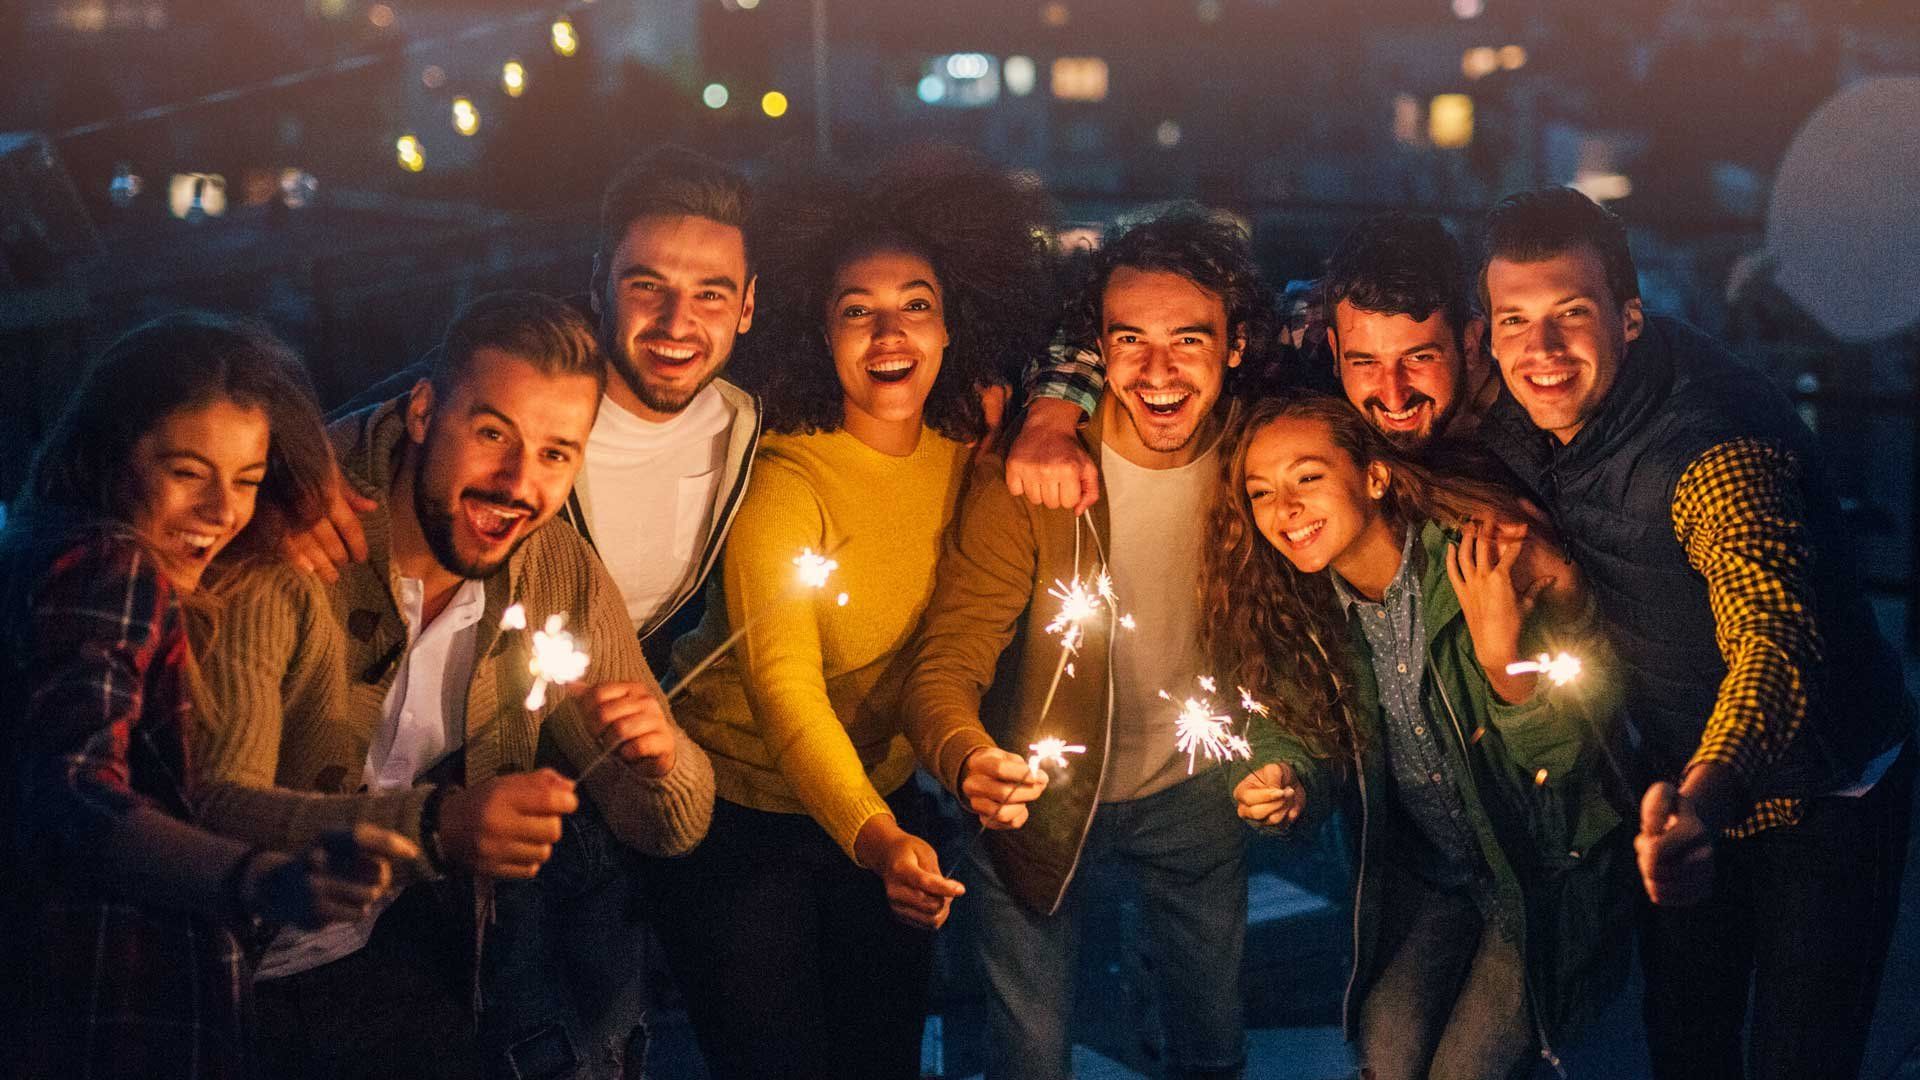 A group of friends pose holding sparklers, facing the camera with their faces illuminated by the sparkler light.